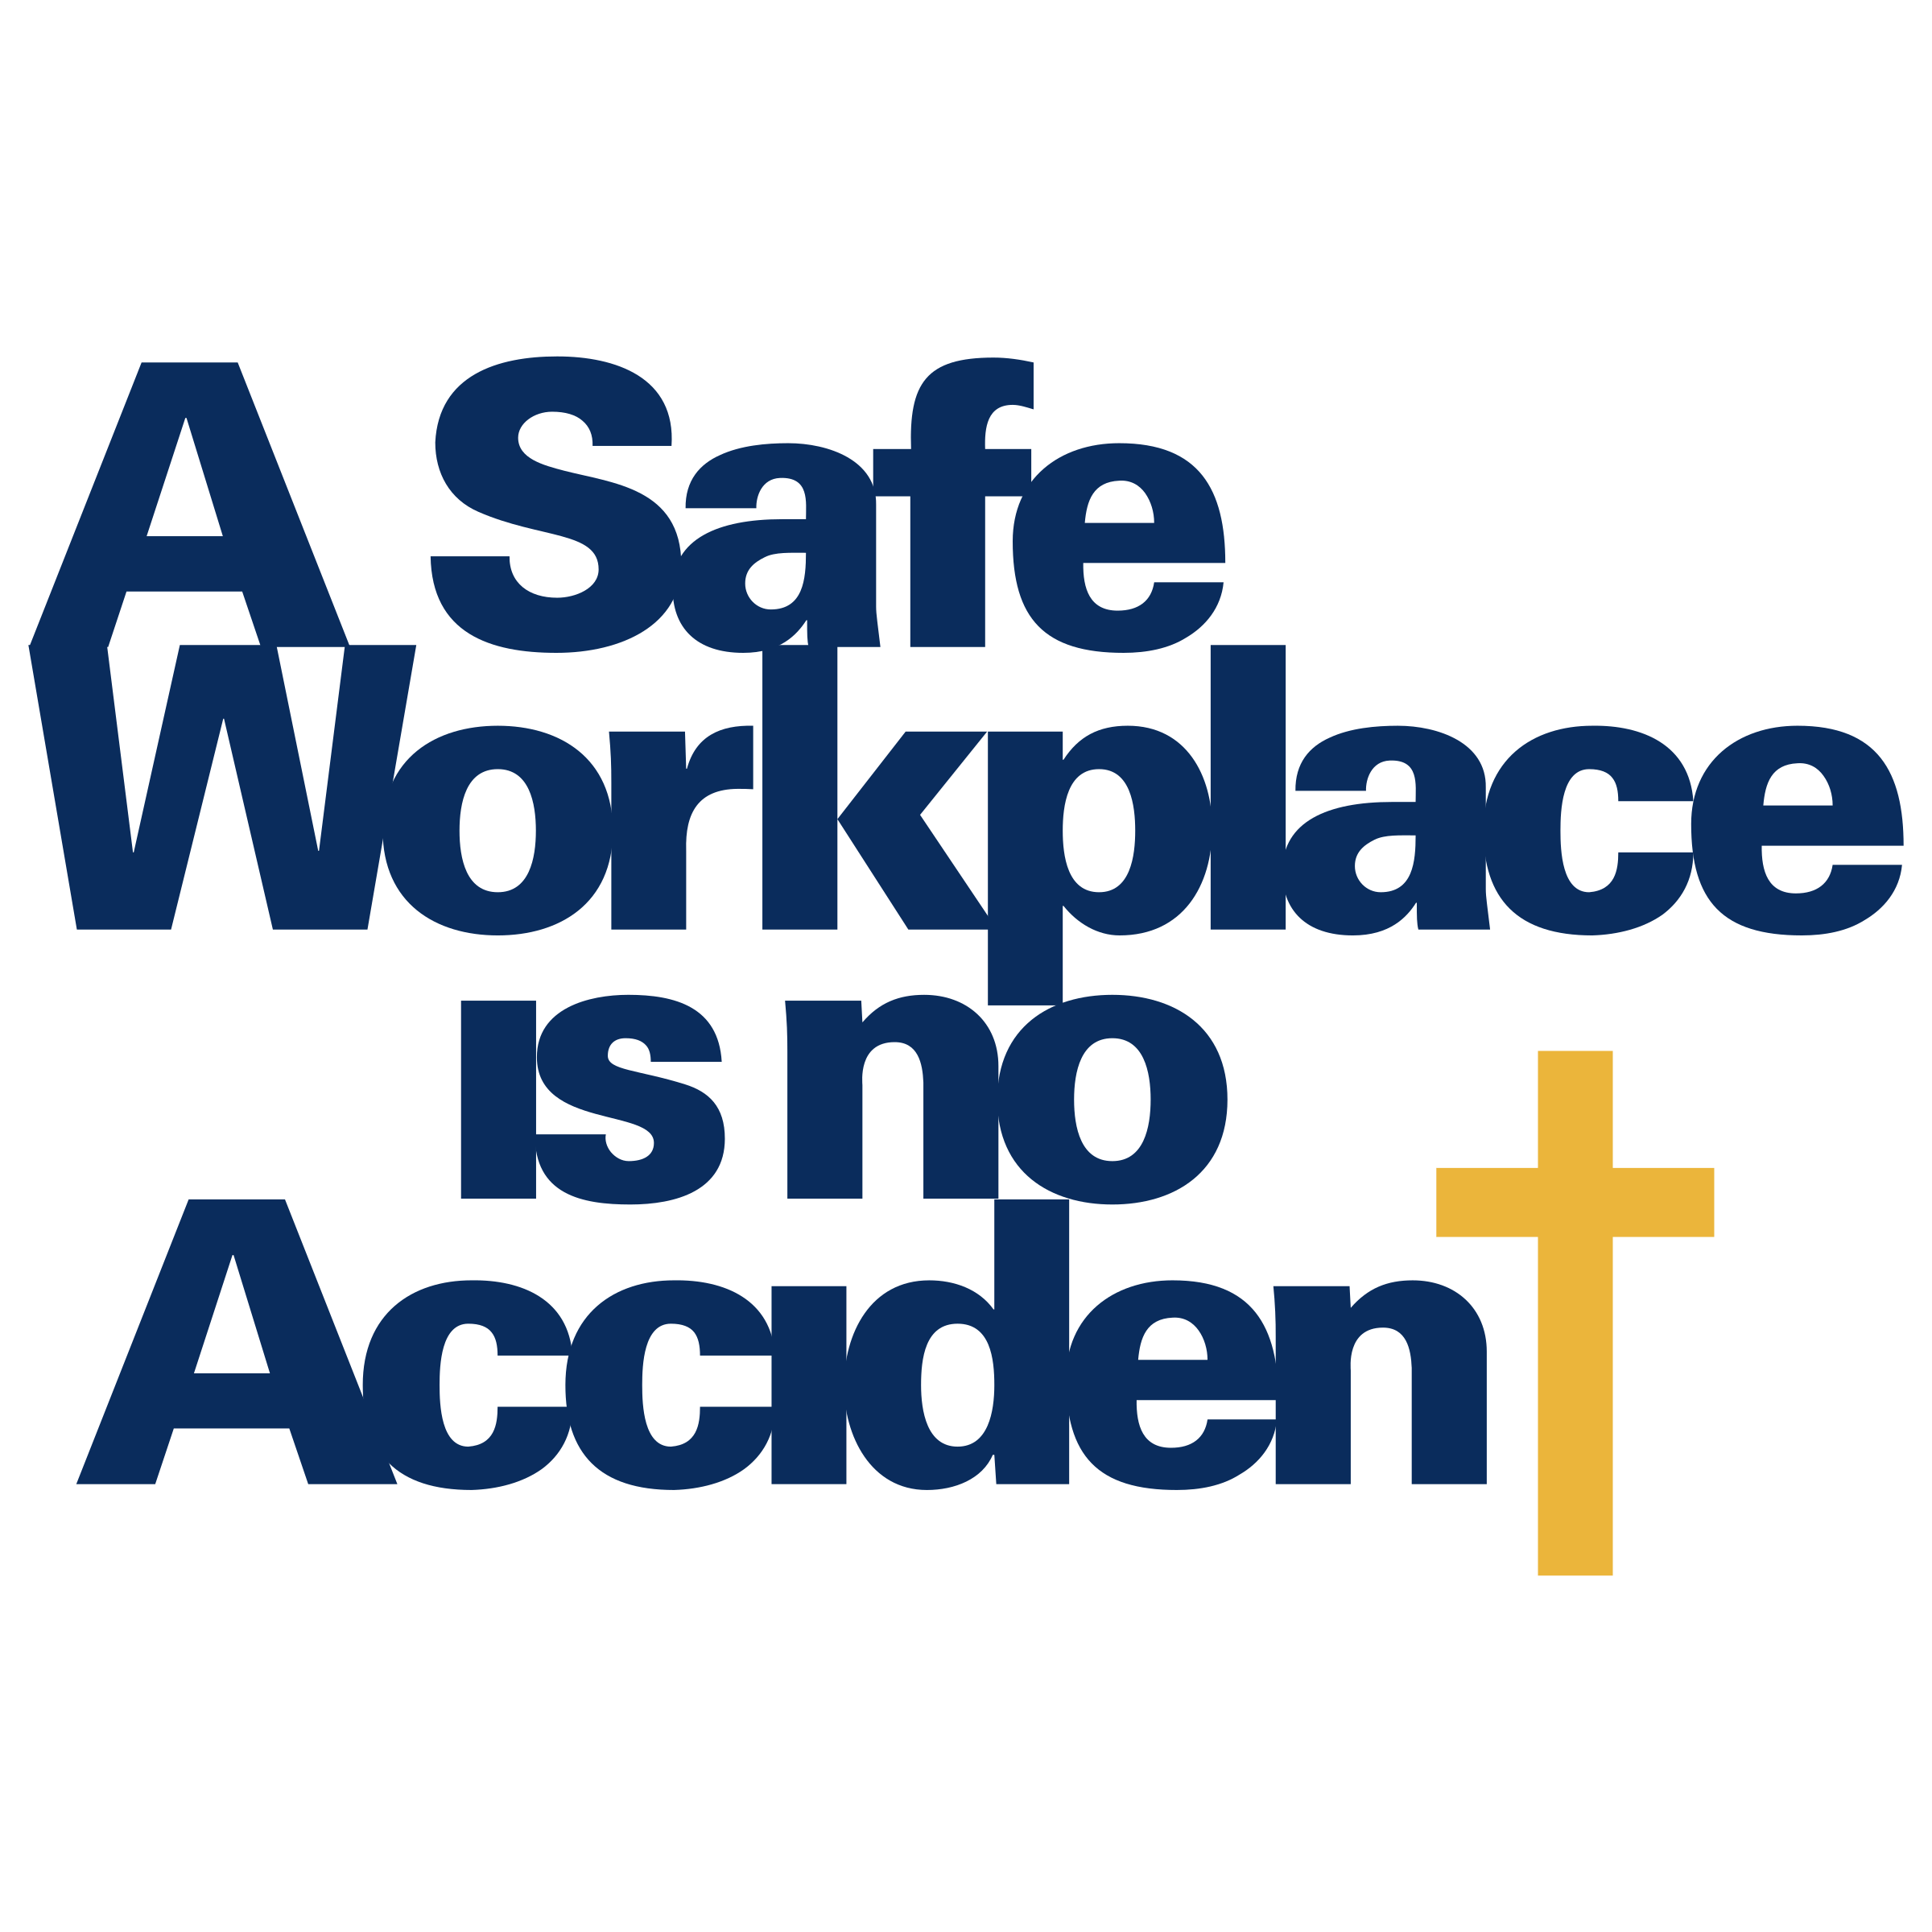 Accident Logo - A Safe Workplace is no Accident Logo PNG Transparent & SVG Vector ...